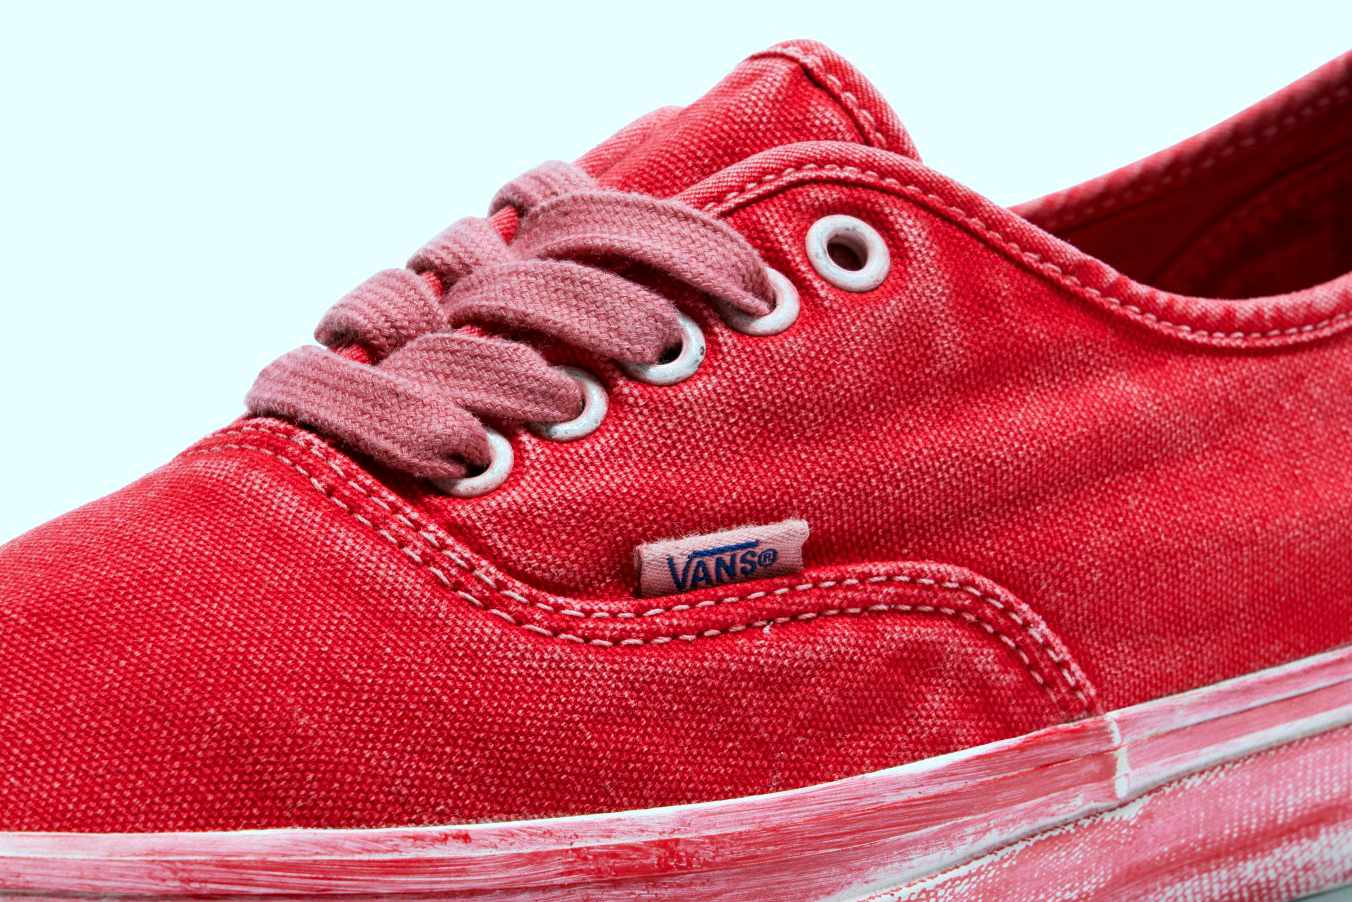 Vans OTW's Authentic 44 sneaker in washed red canvas